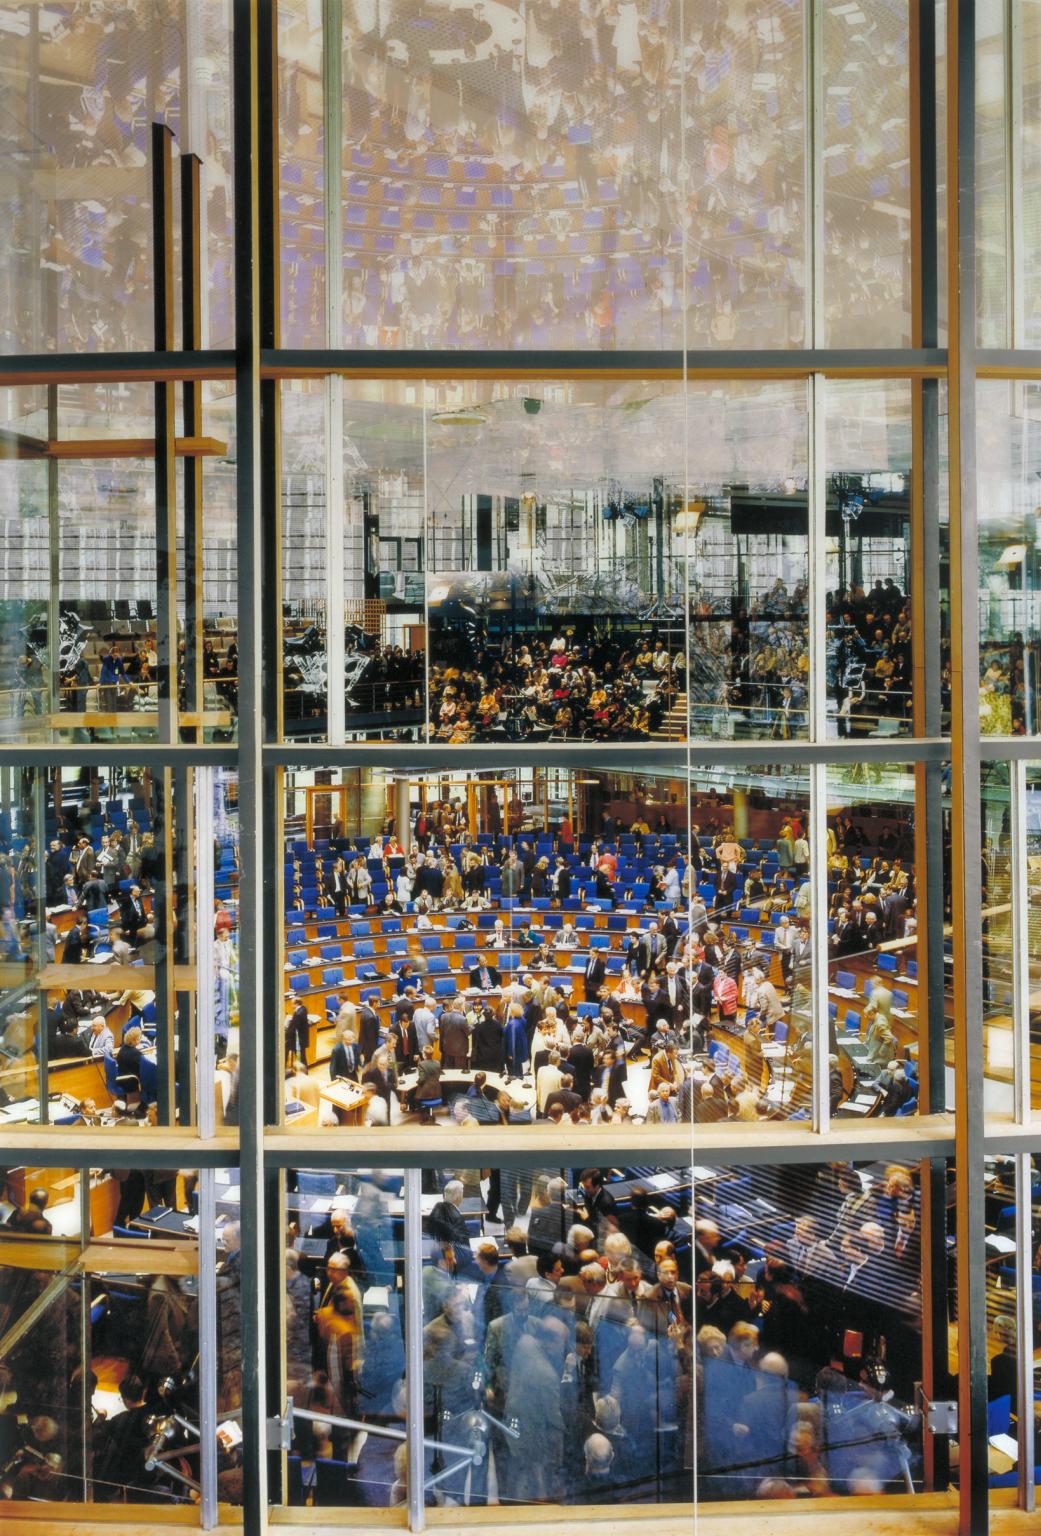 Parliament', Andreas Gursky, 1998 | Tate